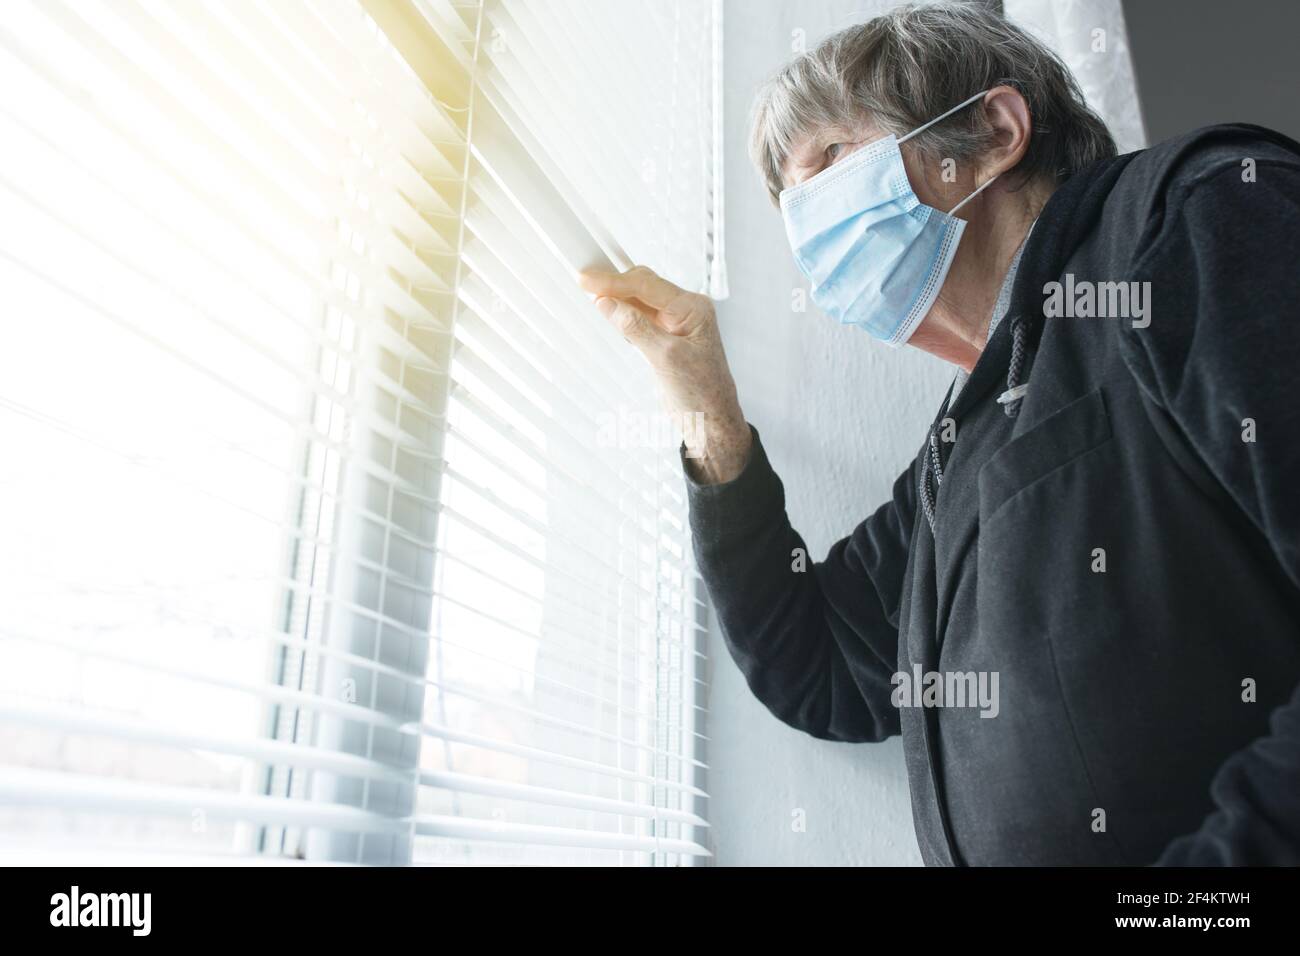 Old woman at home on self-isolation, in medical mask near the window looking outsid.e Stock Photo